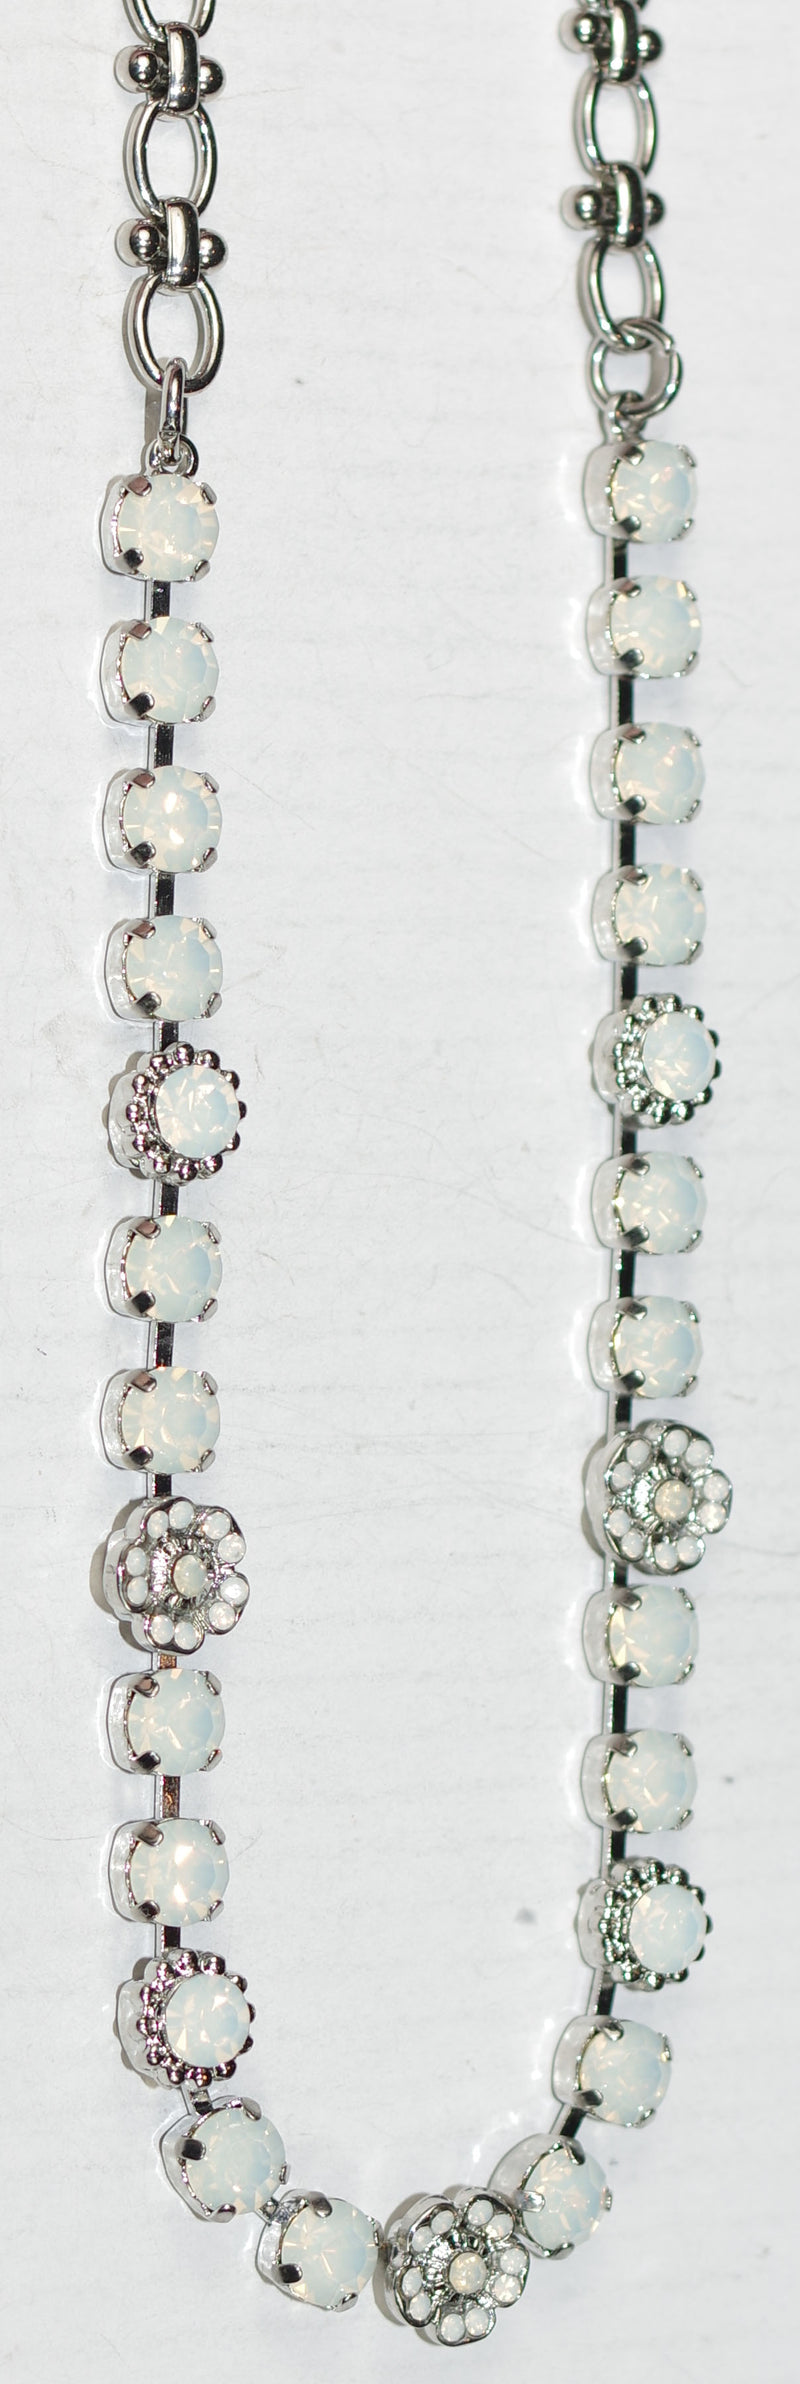 MARIANA NECKLACE WHITE OPAL: white 1/4" stones in silver rhodium setting, 19" adjustable chain